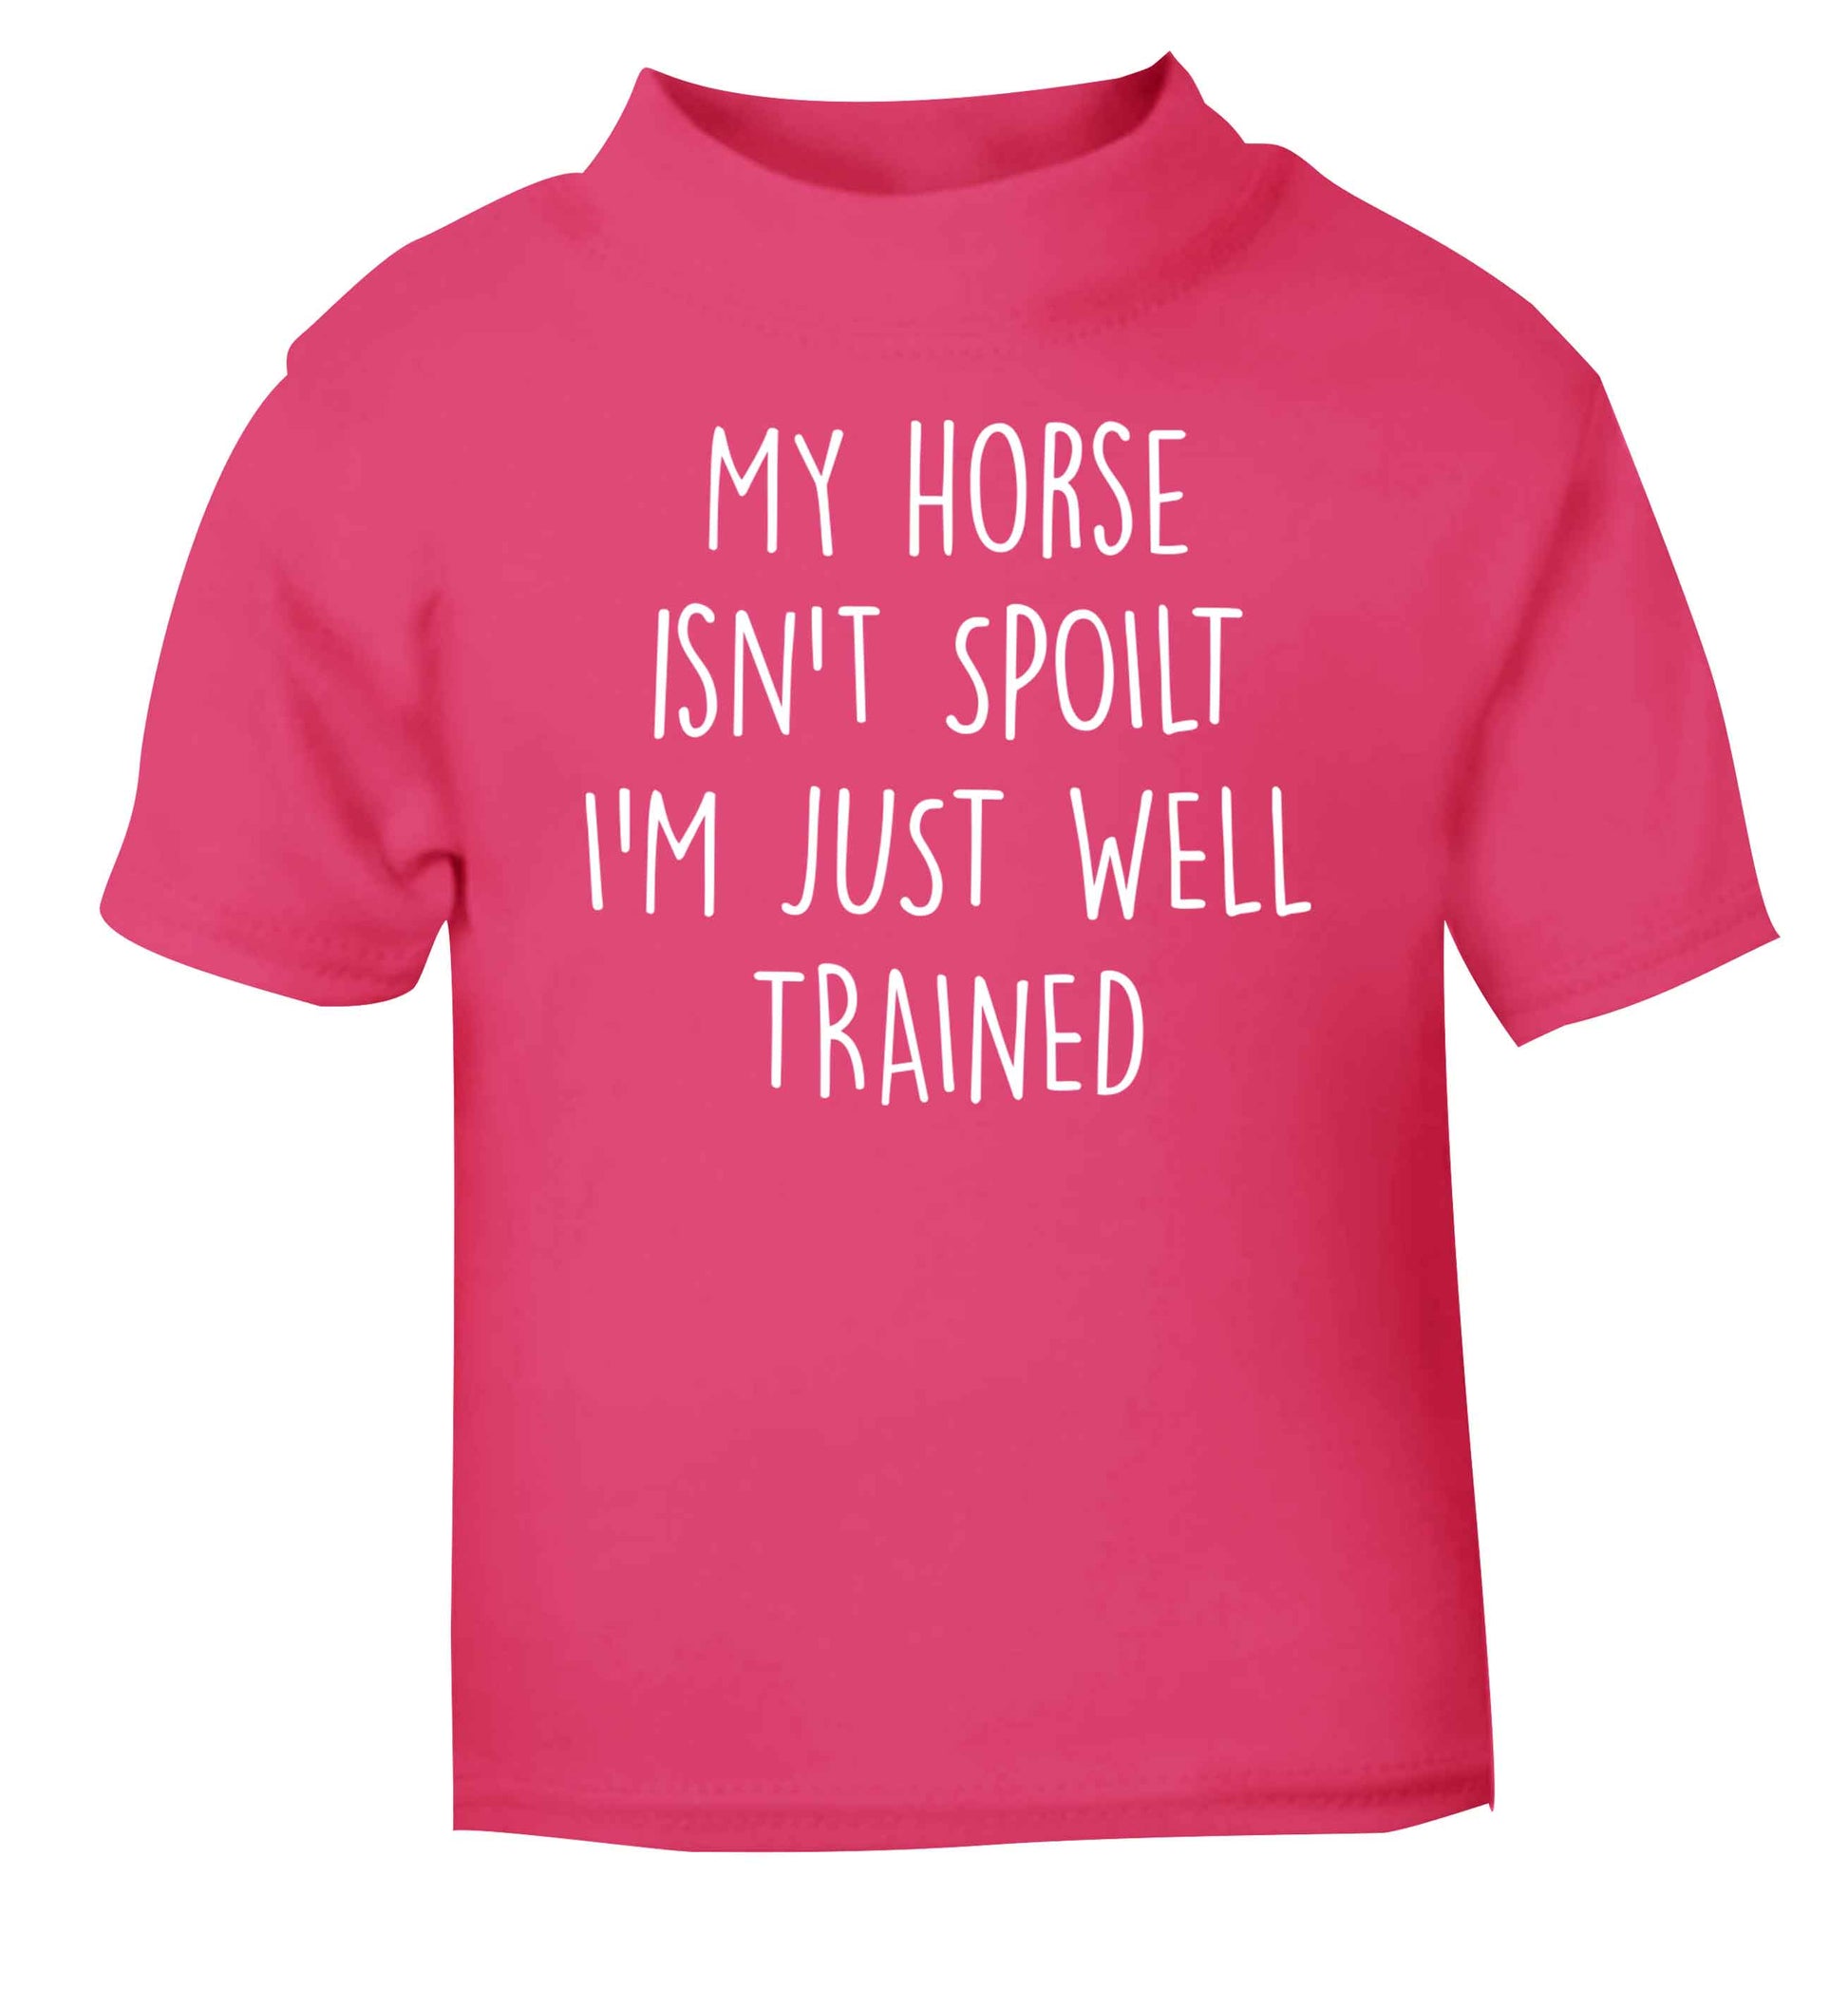 My horse isn't spoilt I'm just well trained pink baby toddler Tshirt 2 Years